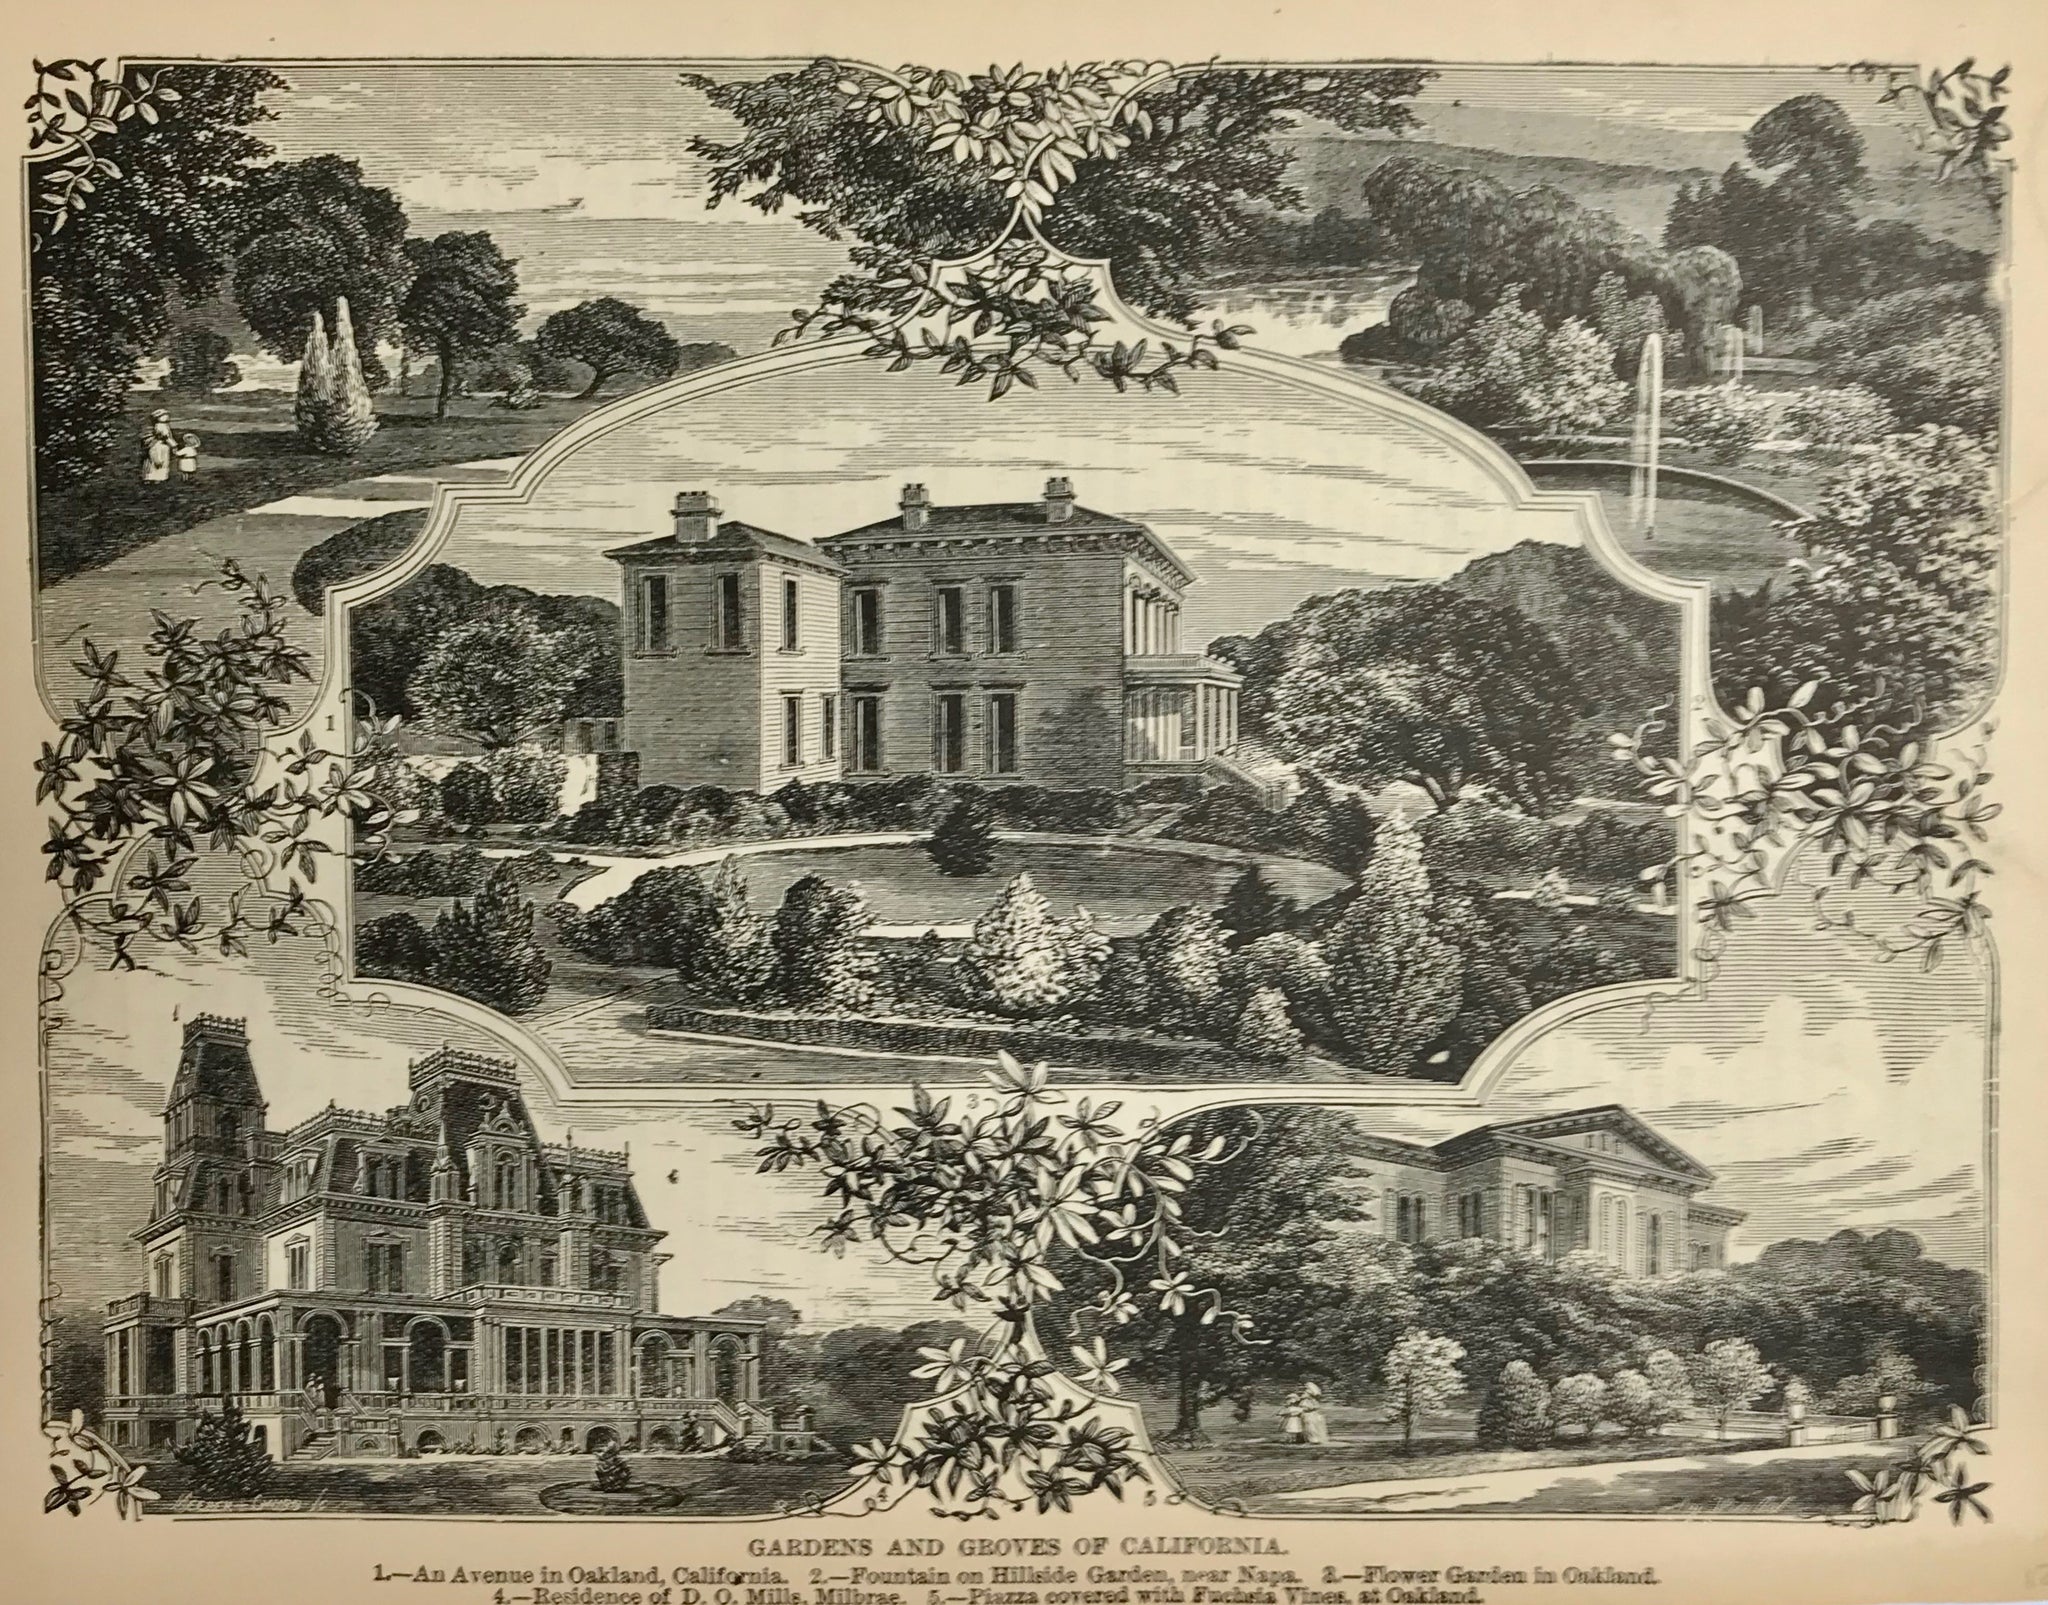 "Gardens and Groves of California" 1. Oakland 2. Fountain of Hillside garden near Napa 3. Flower Garden in Oakland, 4. Residence of D.O. Mills, Milbrae 5. Piazza covered with fuchsia vines in Oakland.  Wood engraving, ca 1870.